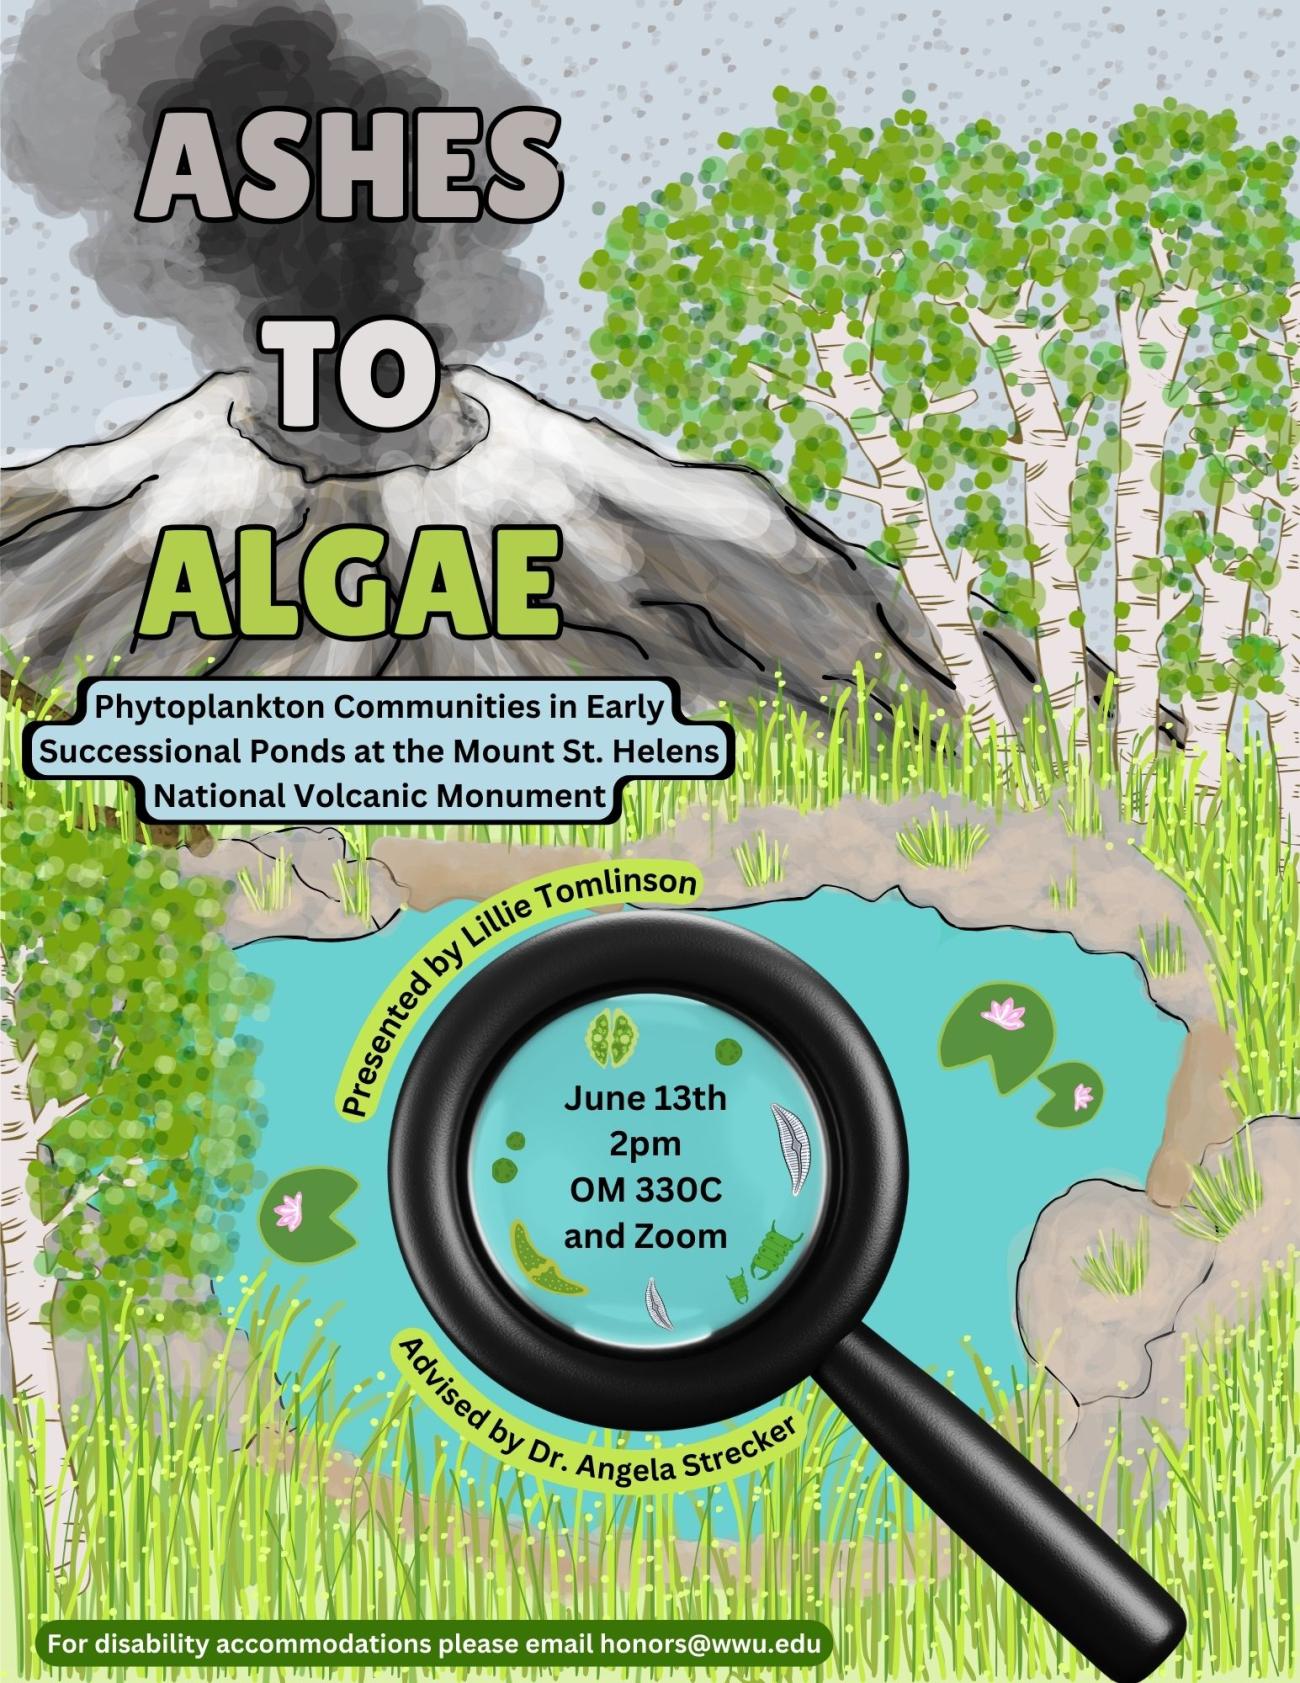 Illustration of a pond and alder trees in a meadow. A large black magnifying glass over the center of the pond and shows phytoplankton and text. In the background of the illustration, Mount St. Helens is shown erupting with a large grey plume of smoke. Text reads “Ashes to Algae: Phytoplankton Communities in Early Successional Ponds at the Mount St. Helens National Volcanic Monument. June 13th, 2pm, OM 330C and Zoom. For disability accommodations, please email honors@wwu.edu.”